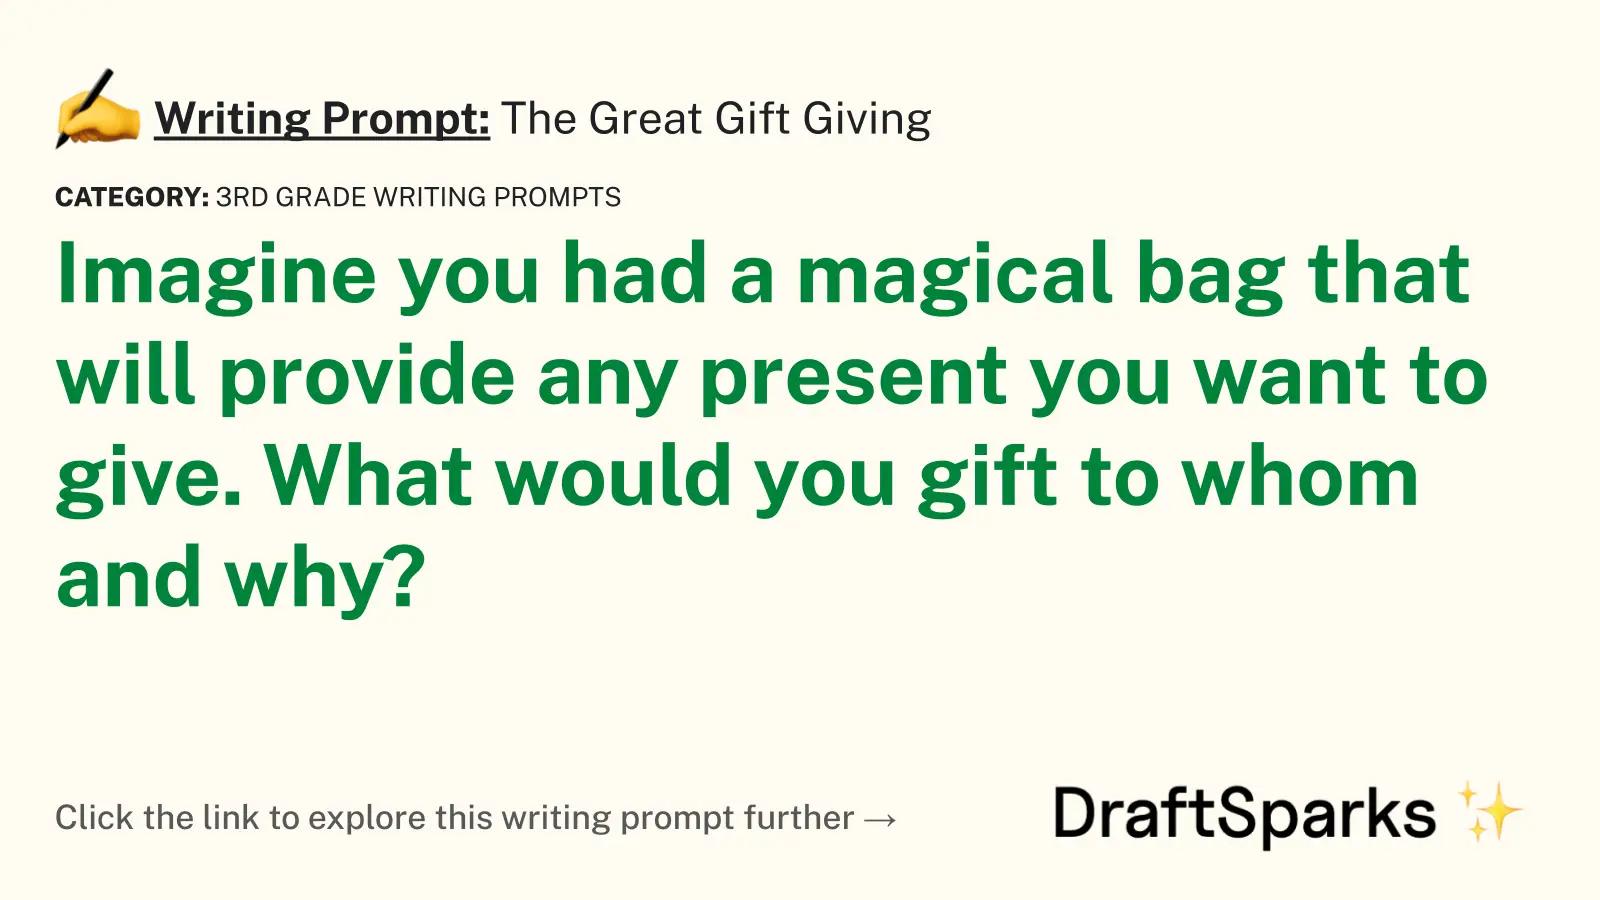 The Great Gift Giving